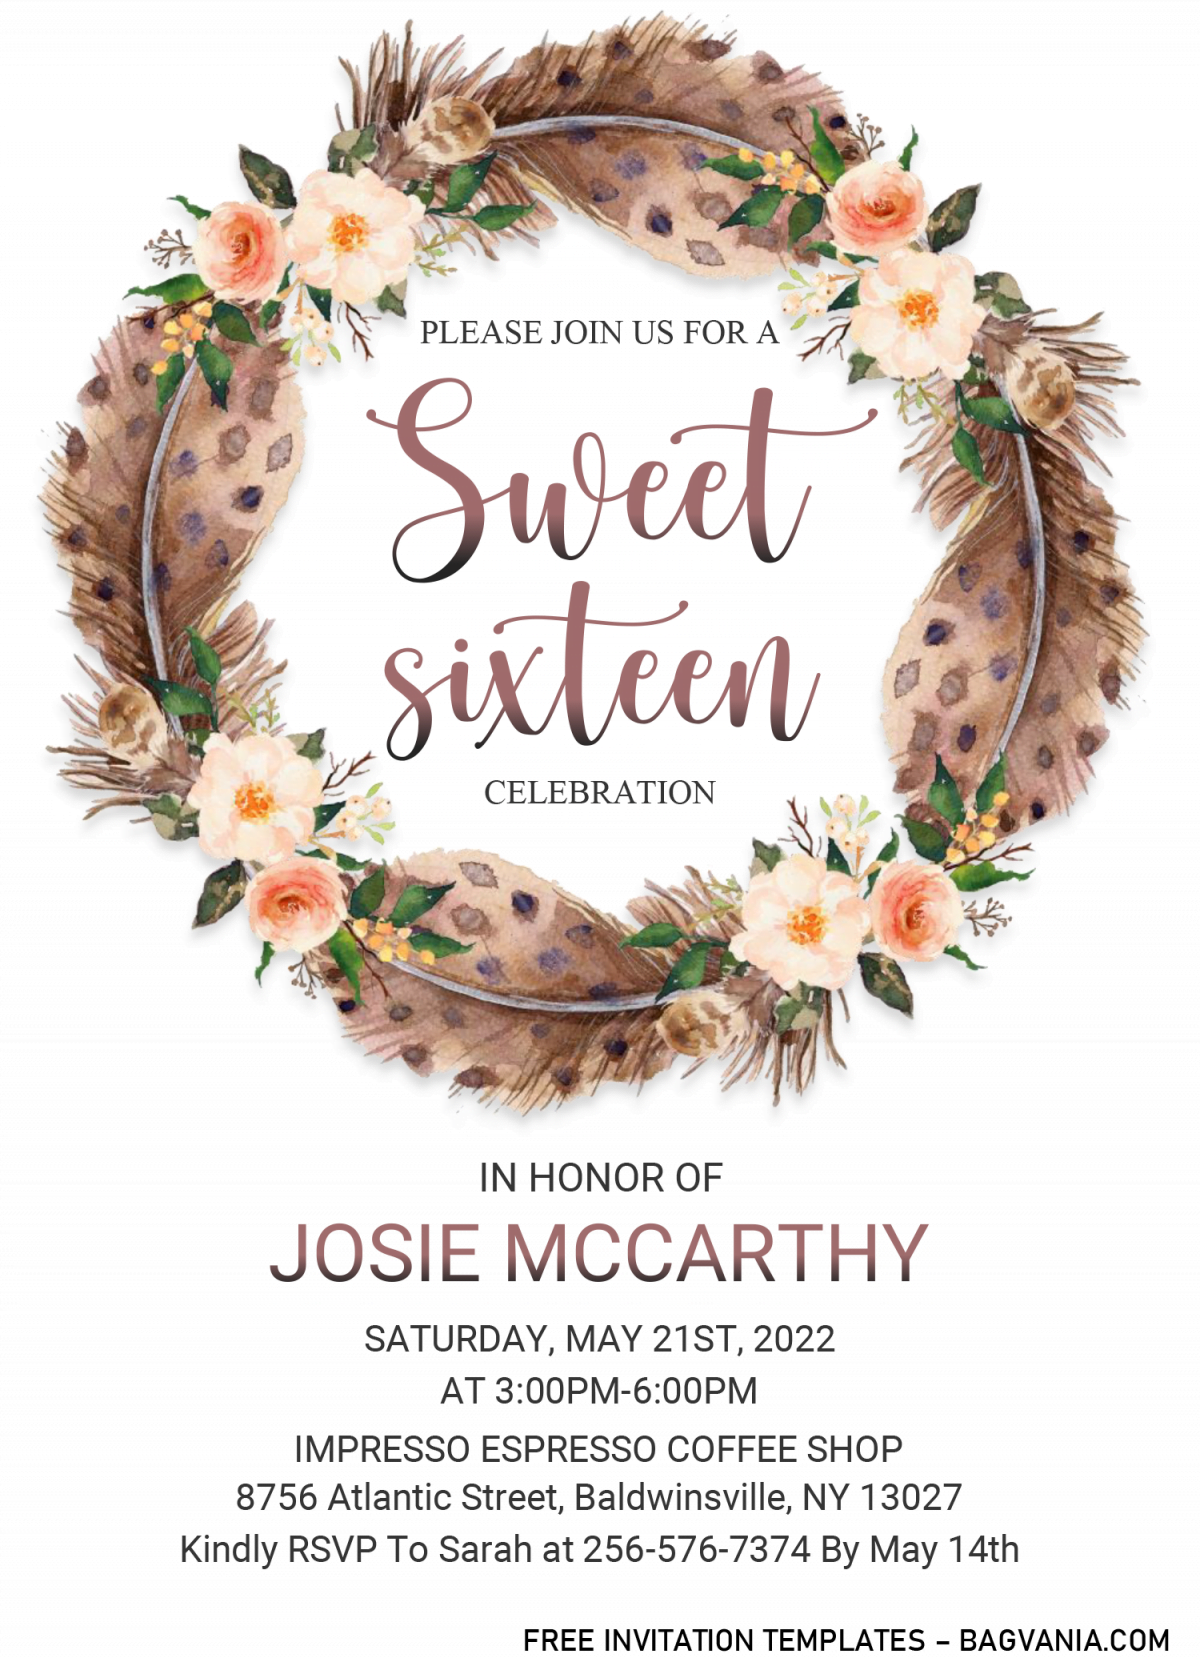 Boho Sweet Sixteen Invitation Templates - Editable With MS Word and has aesthetic fonts